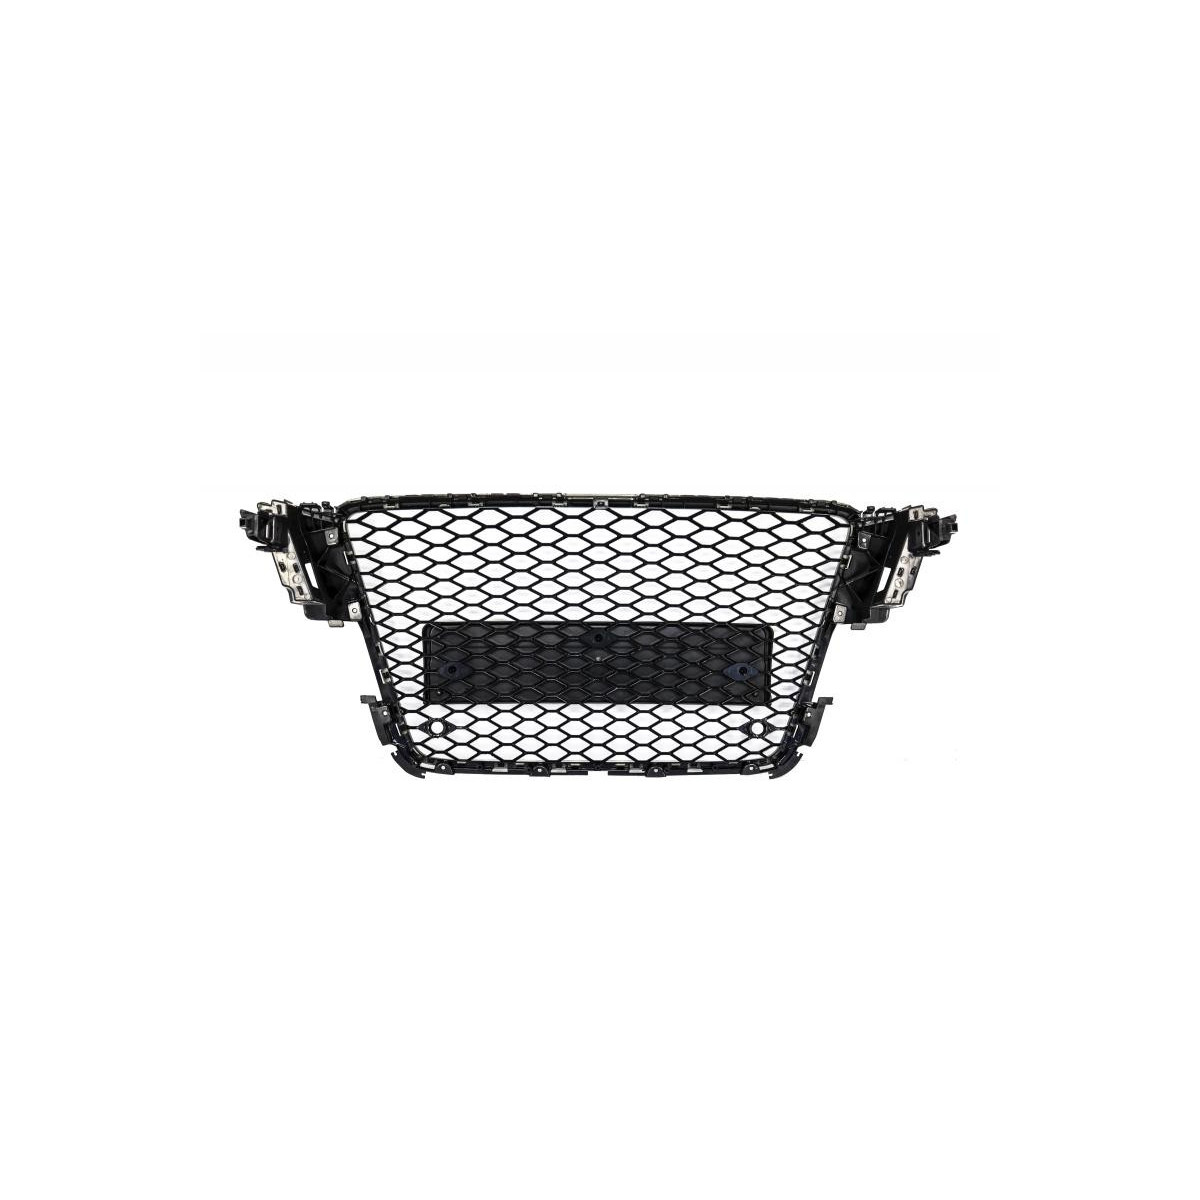 GRILL AUDI A5 07-11 RS DESIGN PIANO BLACK PDC